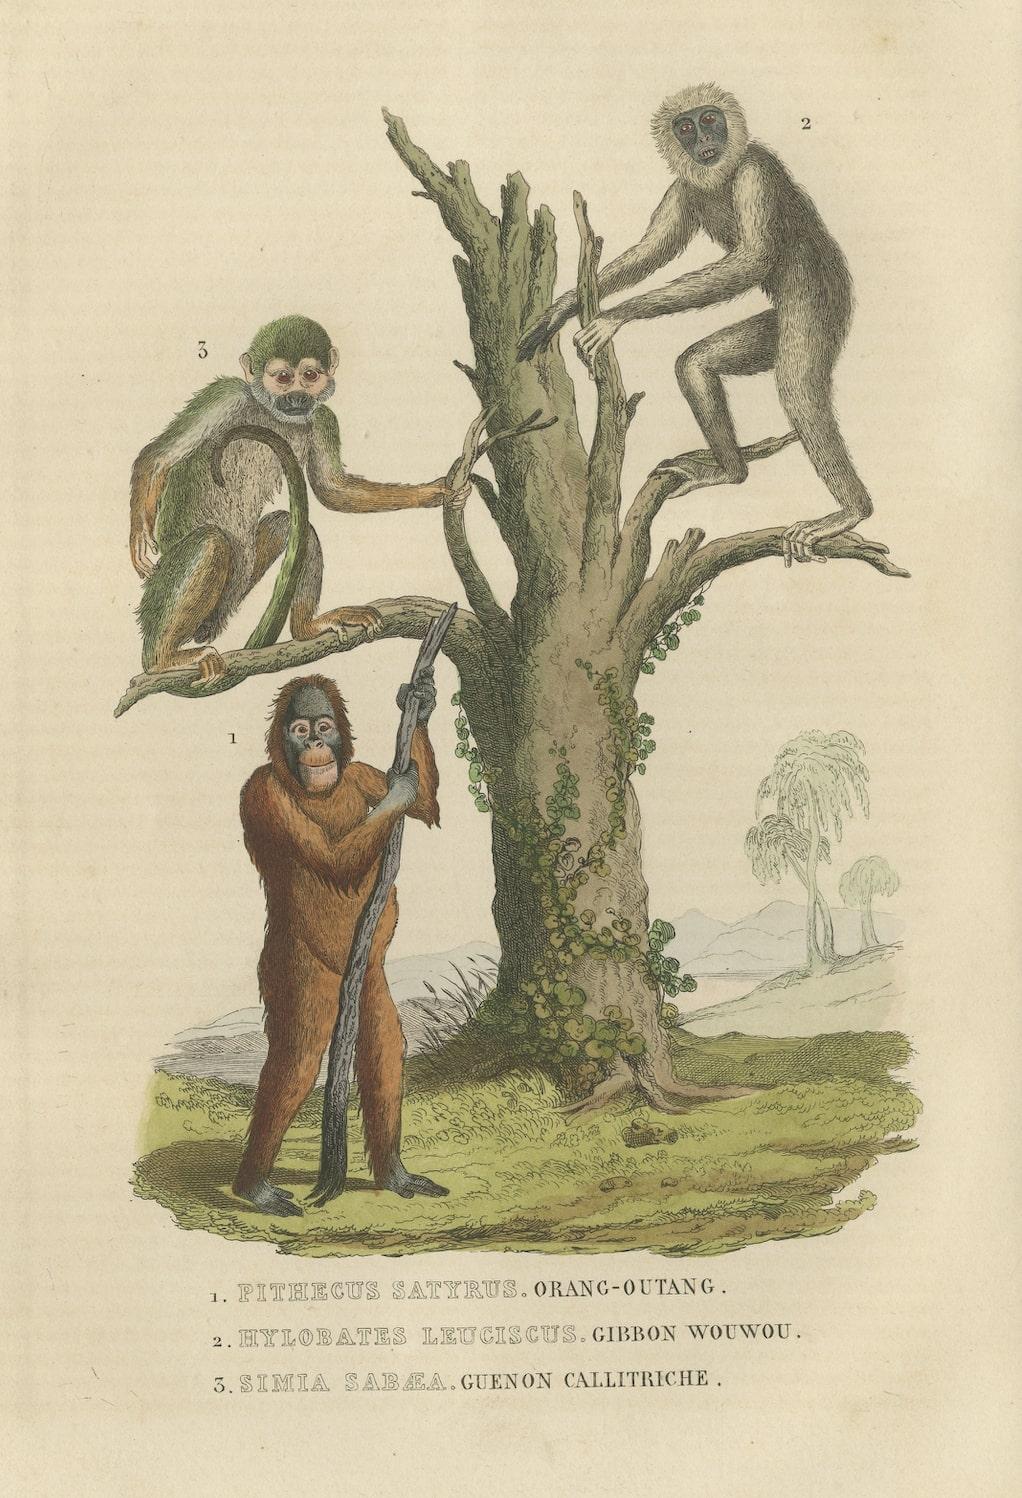 Paper Old Print of a Red or Asiatic Orangoutan, Javan Silvery Gibbon and Green Monkey For Sale